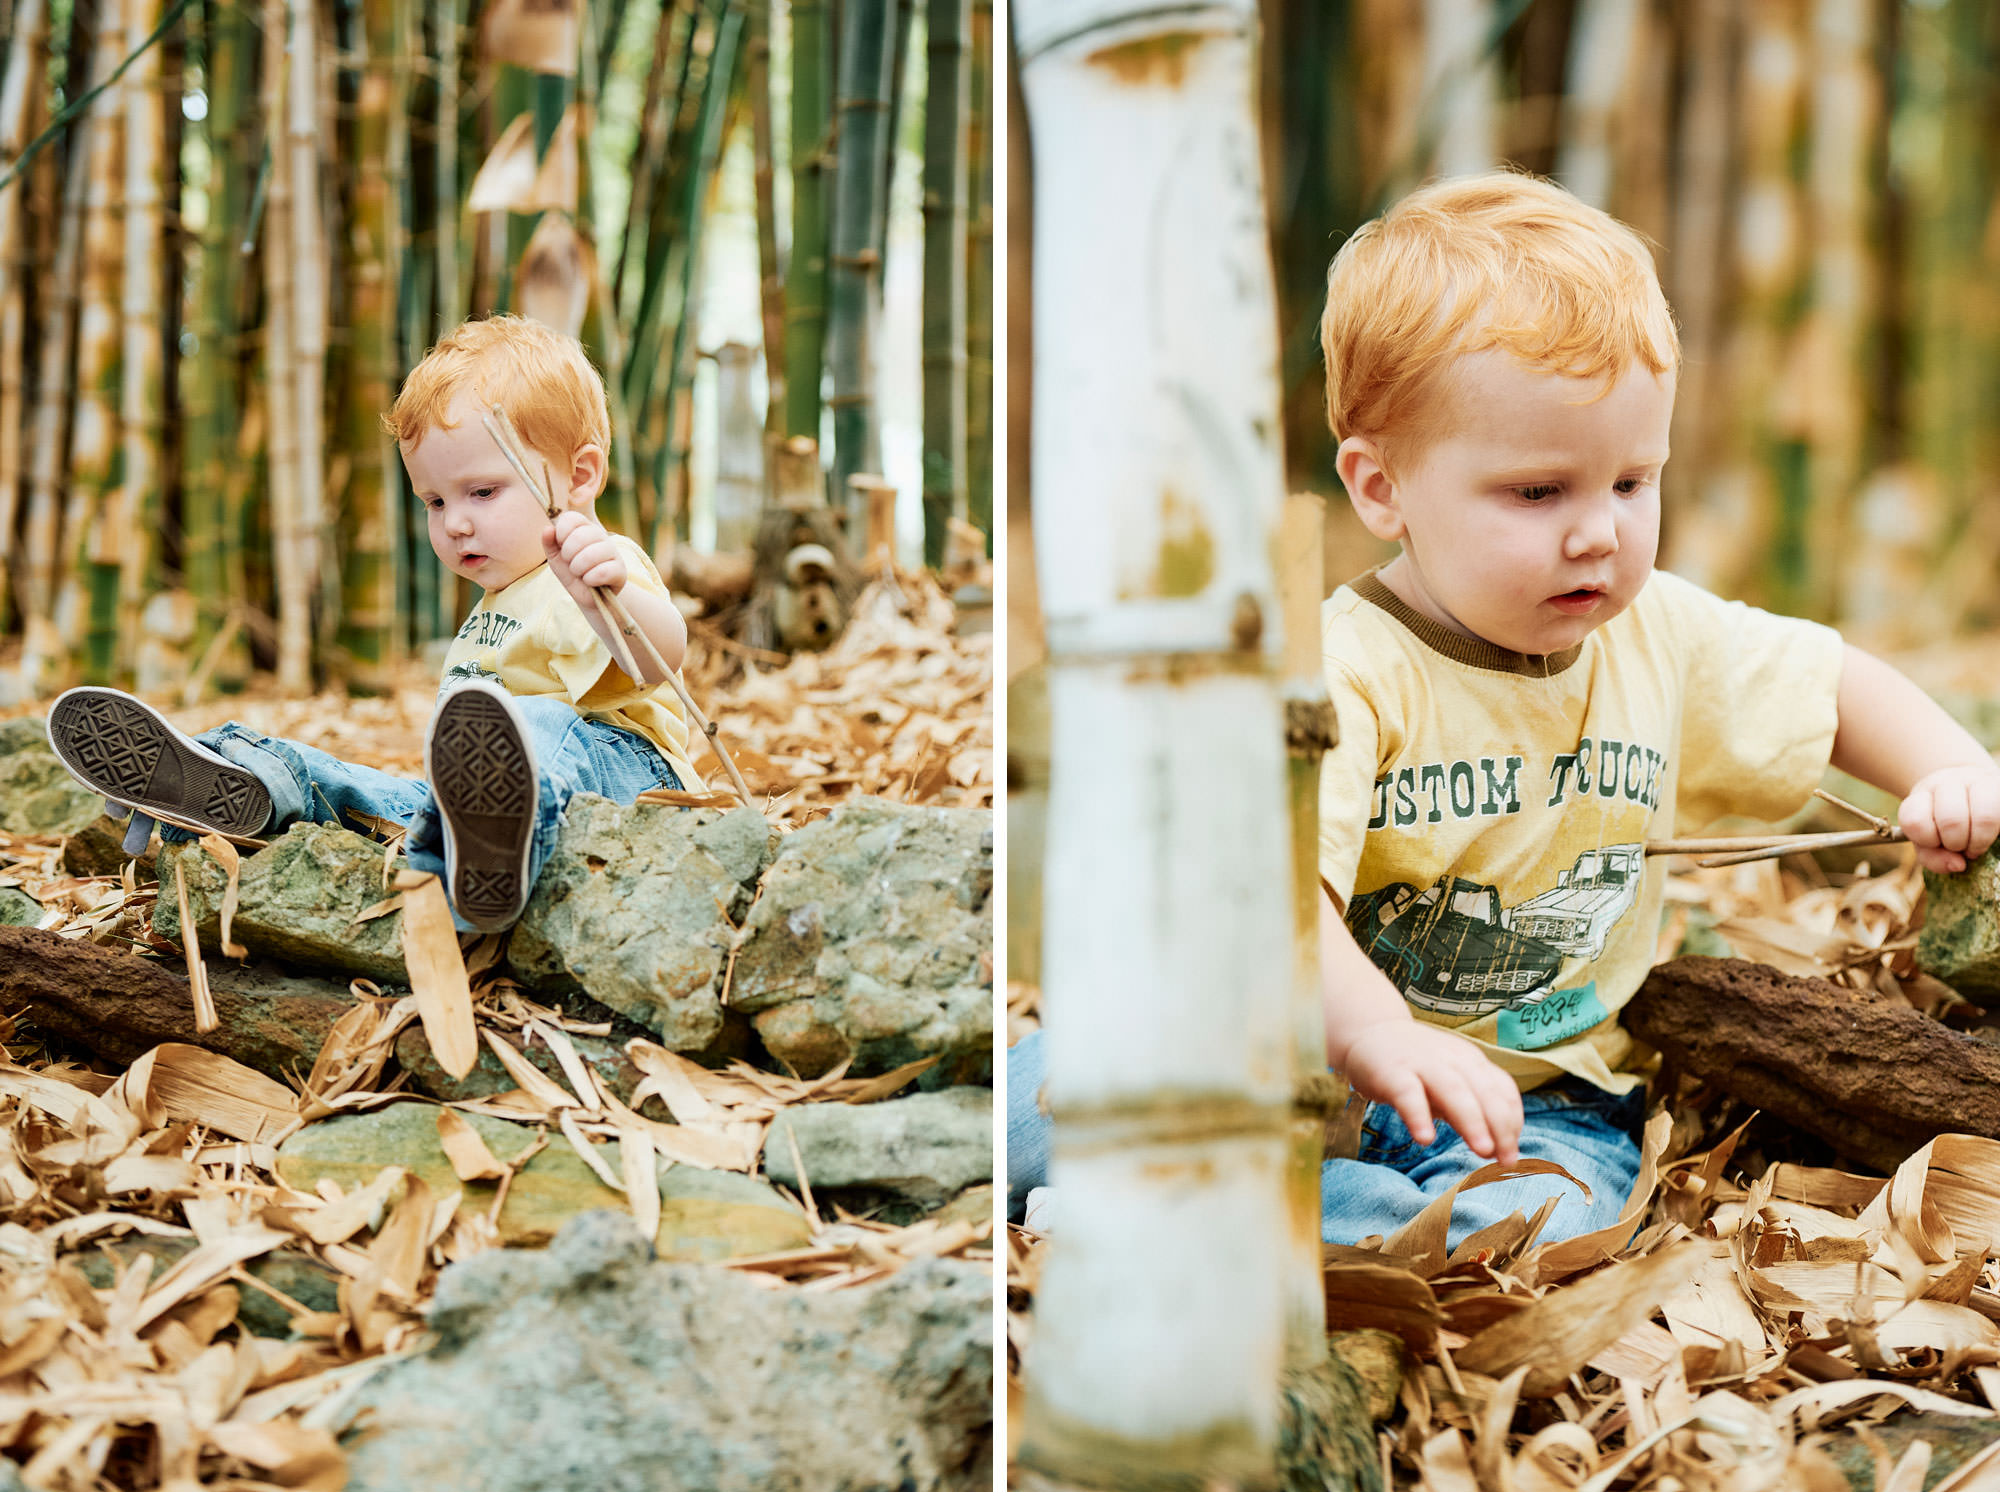 Nathan playing with sticks amongst the bamboo